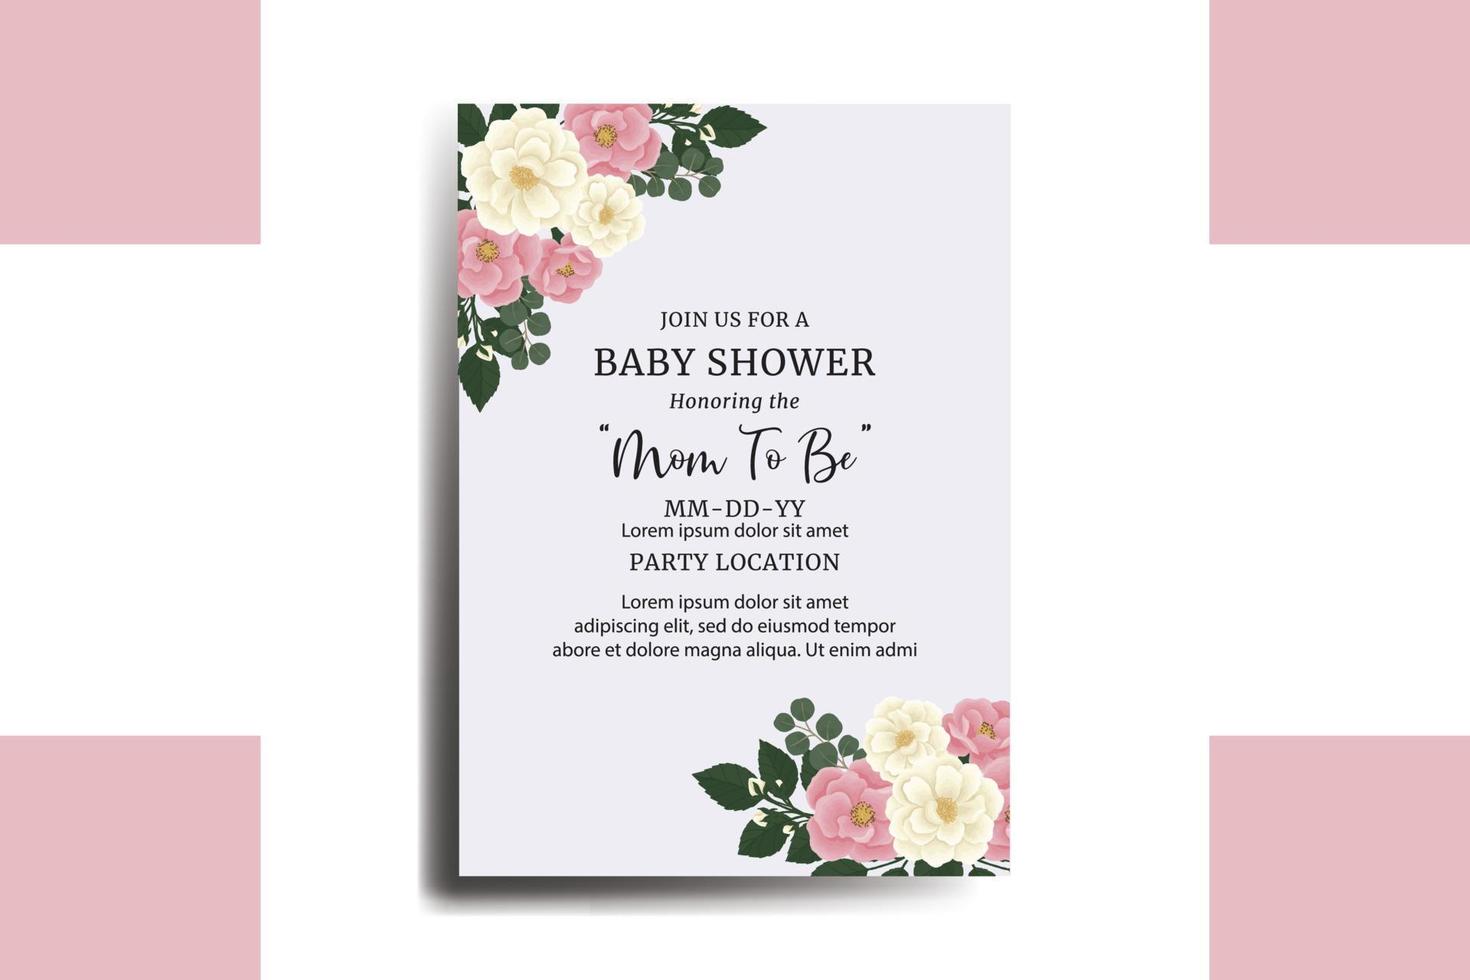 Baby Shower Greeting Card Pink Mini Rose Flower Design Template vector